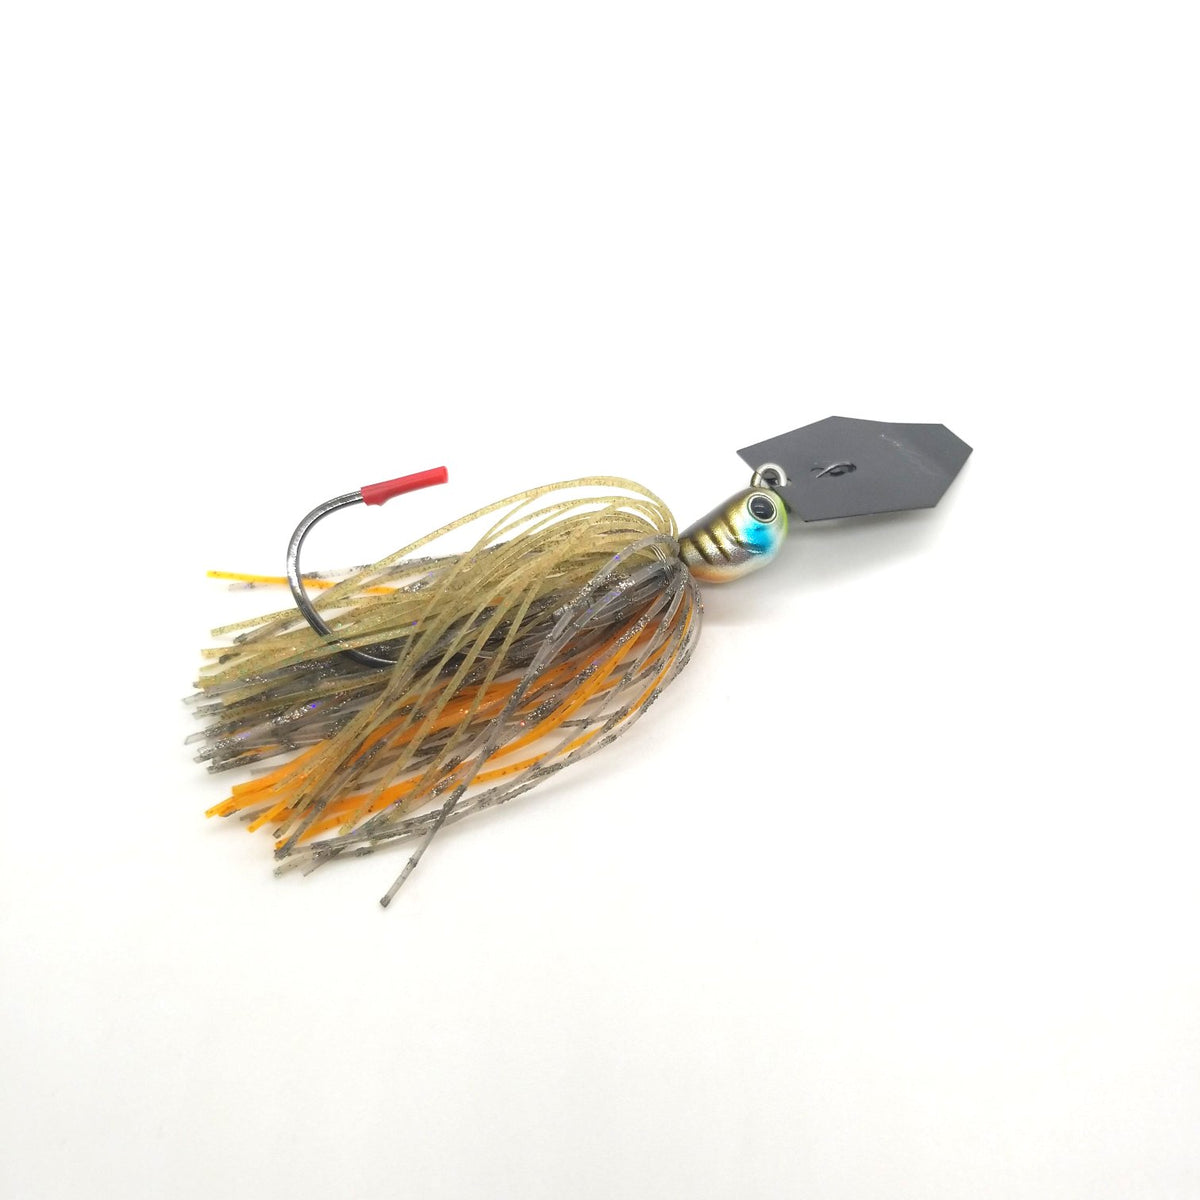 Z-Man Chatterbait Jack Hammer 3/8oz Ghost Baby Gill  CBJH38-22 - American  Legacy Fishing, G Loomis Superstore